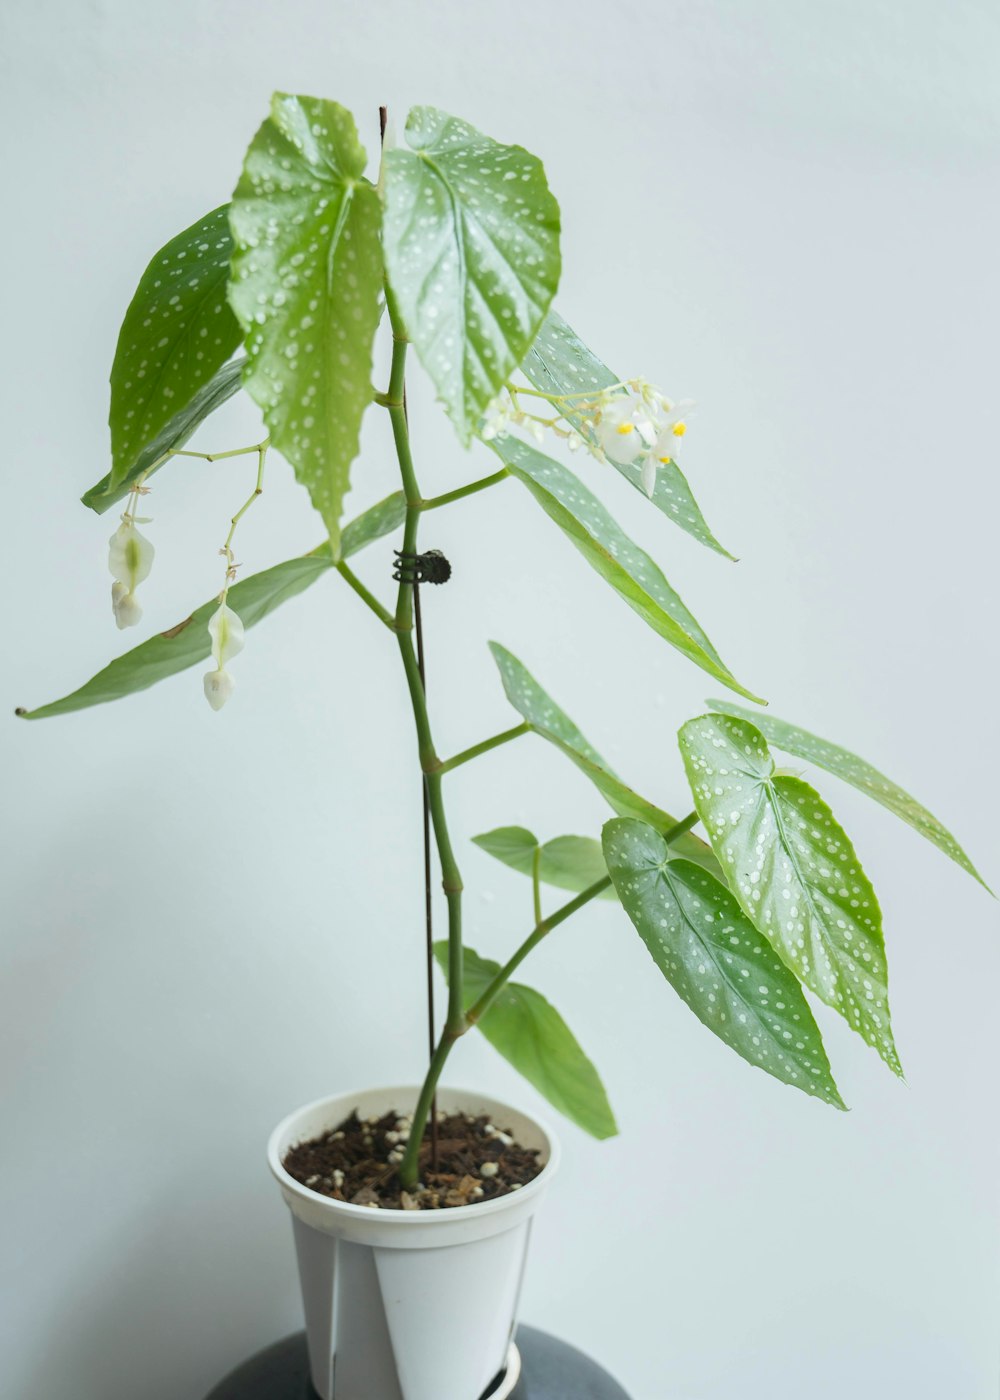 a potted plant with white flowers and green leaves